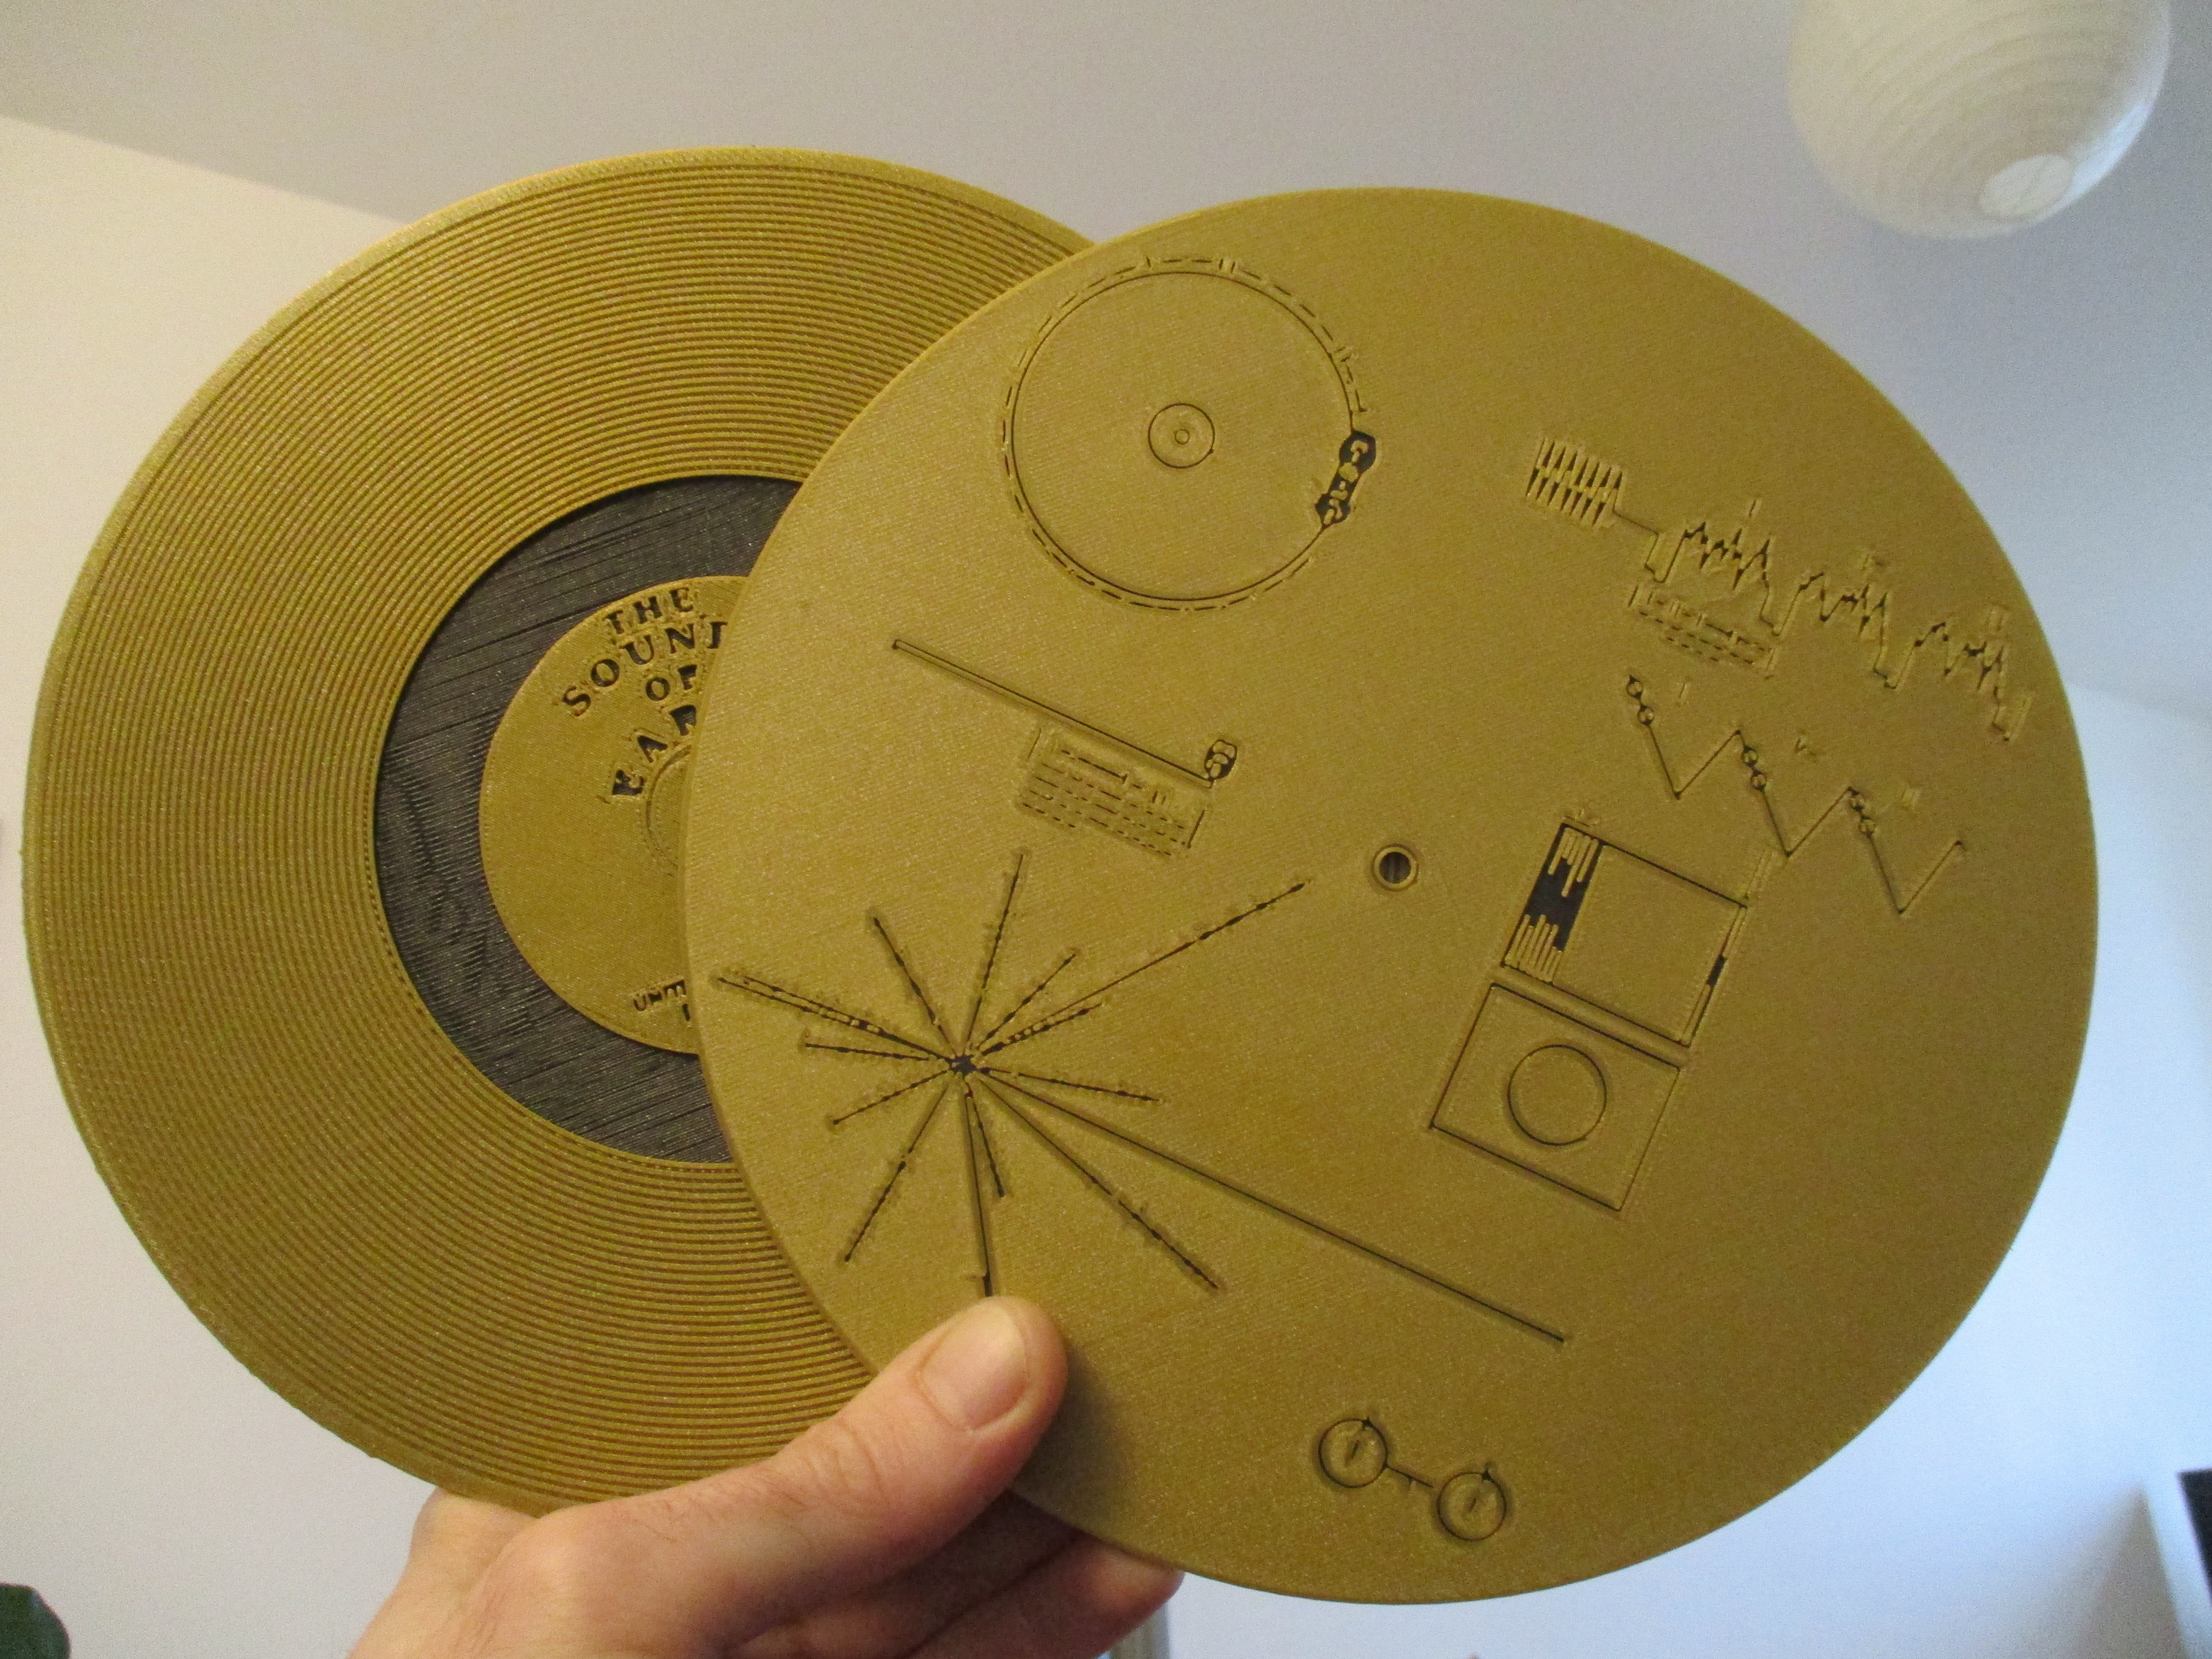 VOYAGER Golden Record (1977) - 2 Sides